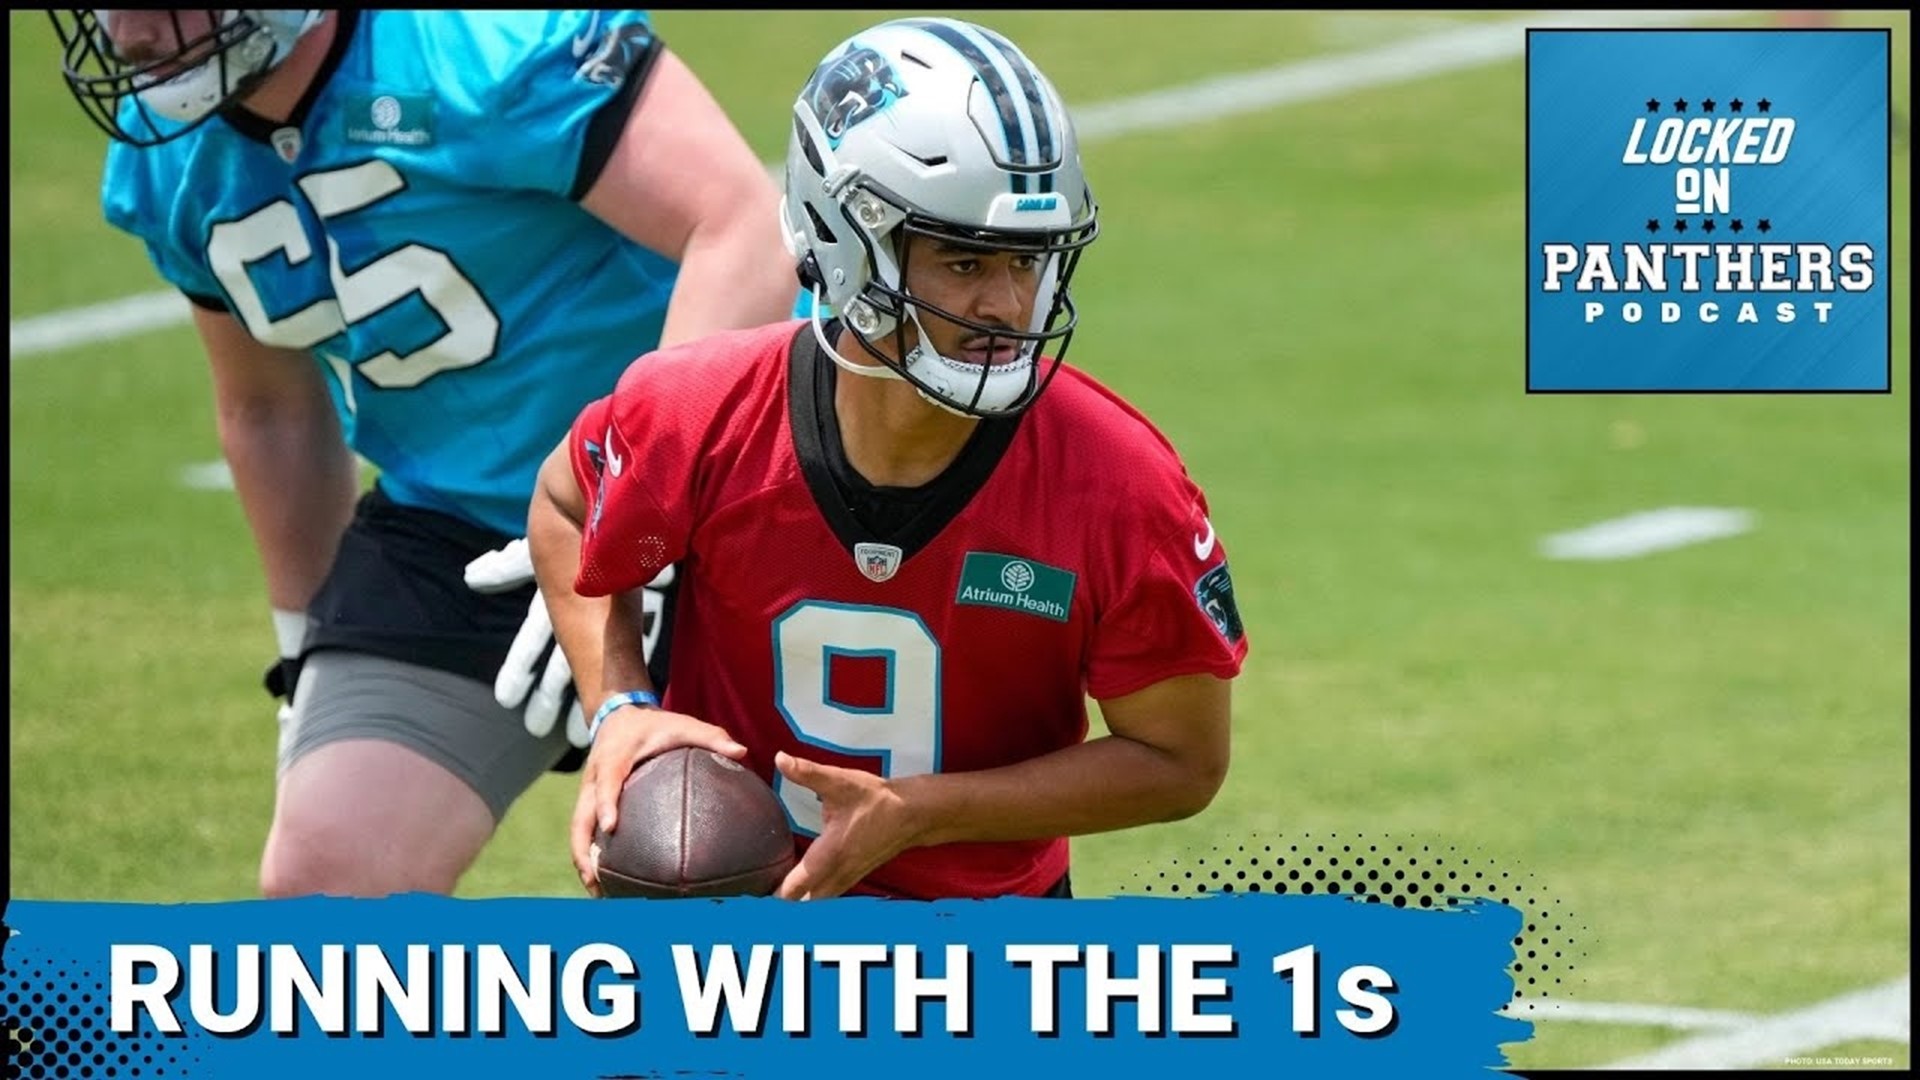 Julian Council previewed the upcoming week for Young and what else fans should be monitoring from minicamp.